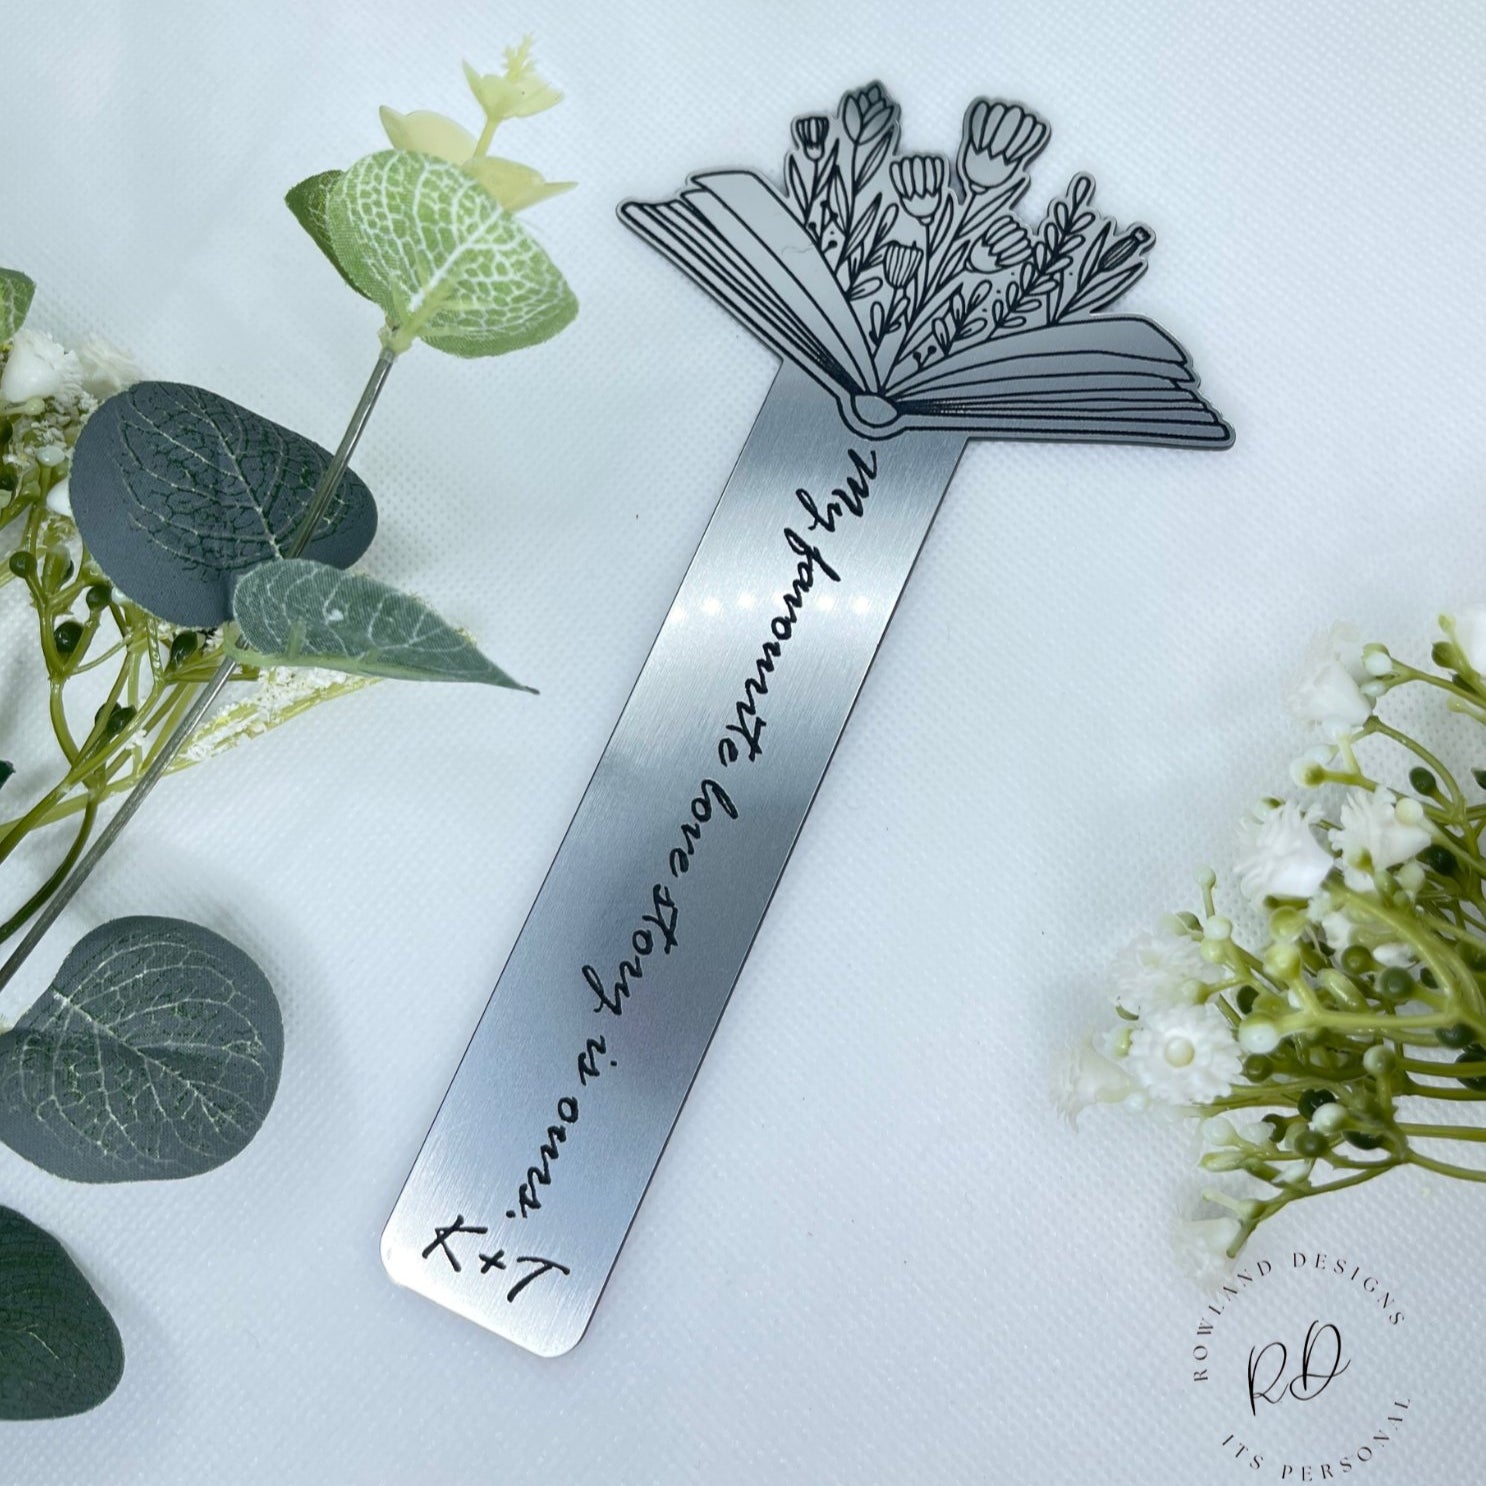 Discover the perfect gift for yourself or fellow book enthusiasts - bookmarks that combine practicality with elegance. Customize these bookmarks with your initials for that extra personal touch, as illustrated in the images. An ideal blend of functionality and distinctive style, making for a thoughtful present.